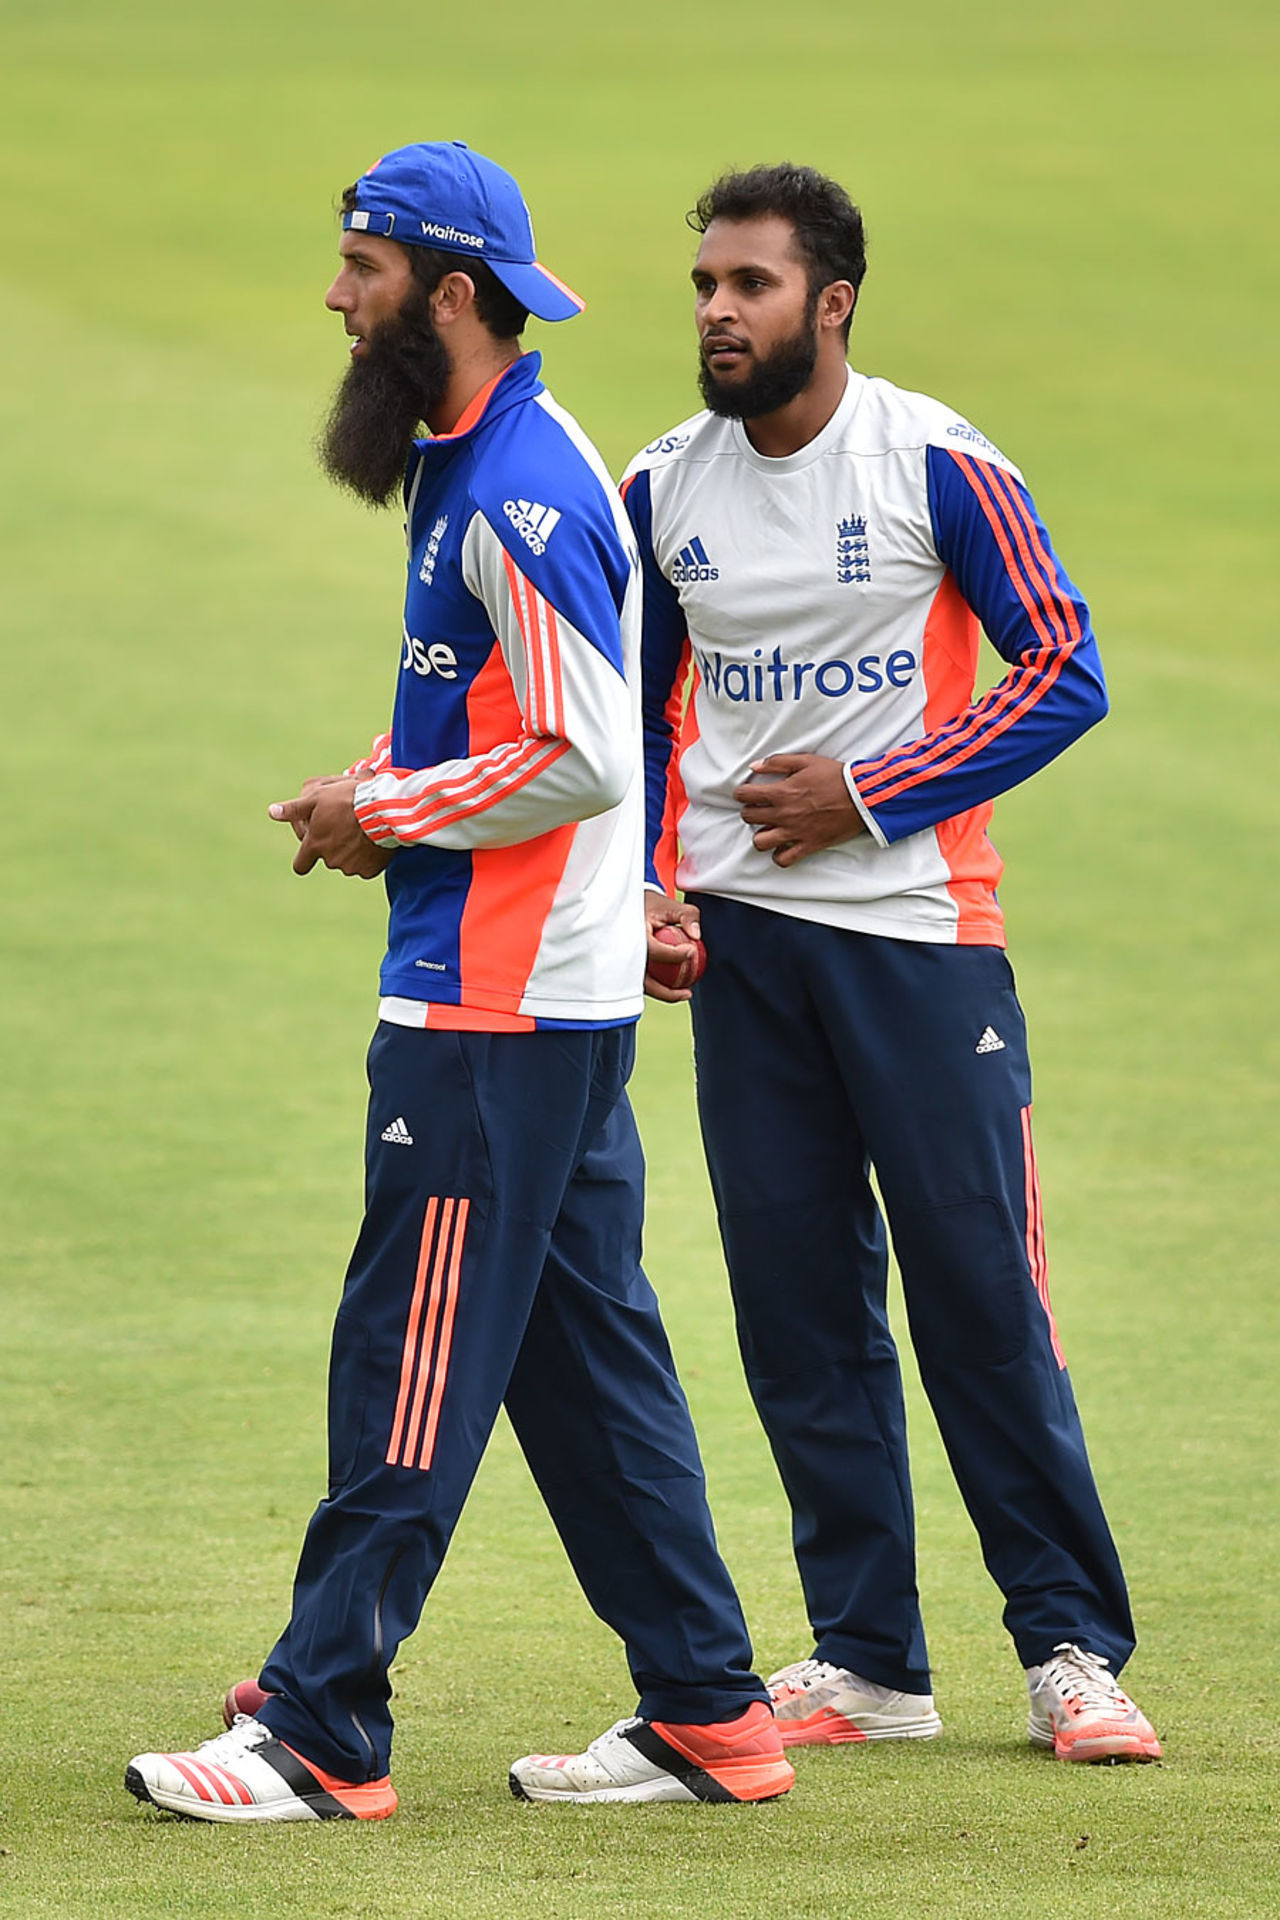 Spin twins? Moeen Ali and Adil Rashid offer England different styles, Cardiff, July 6, 2015